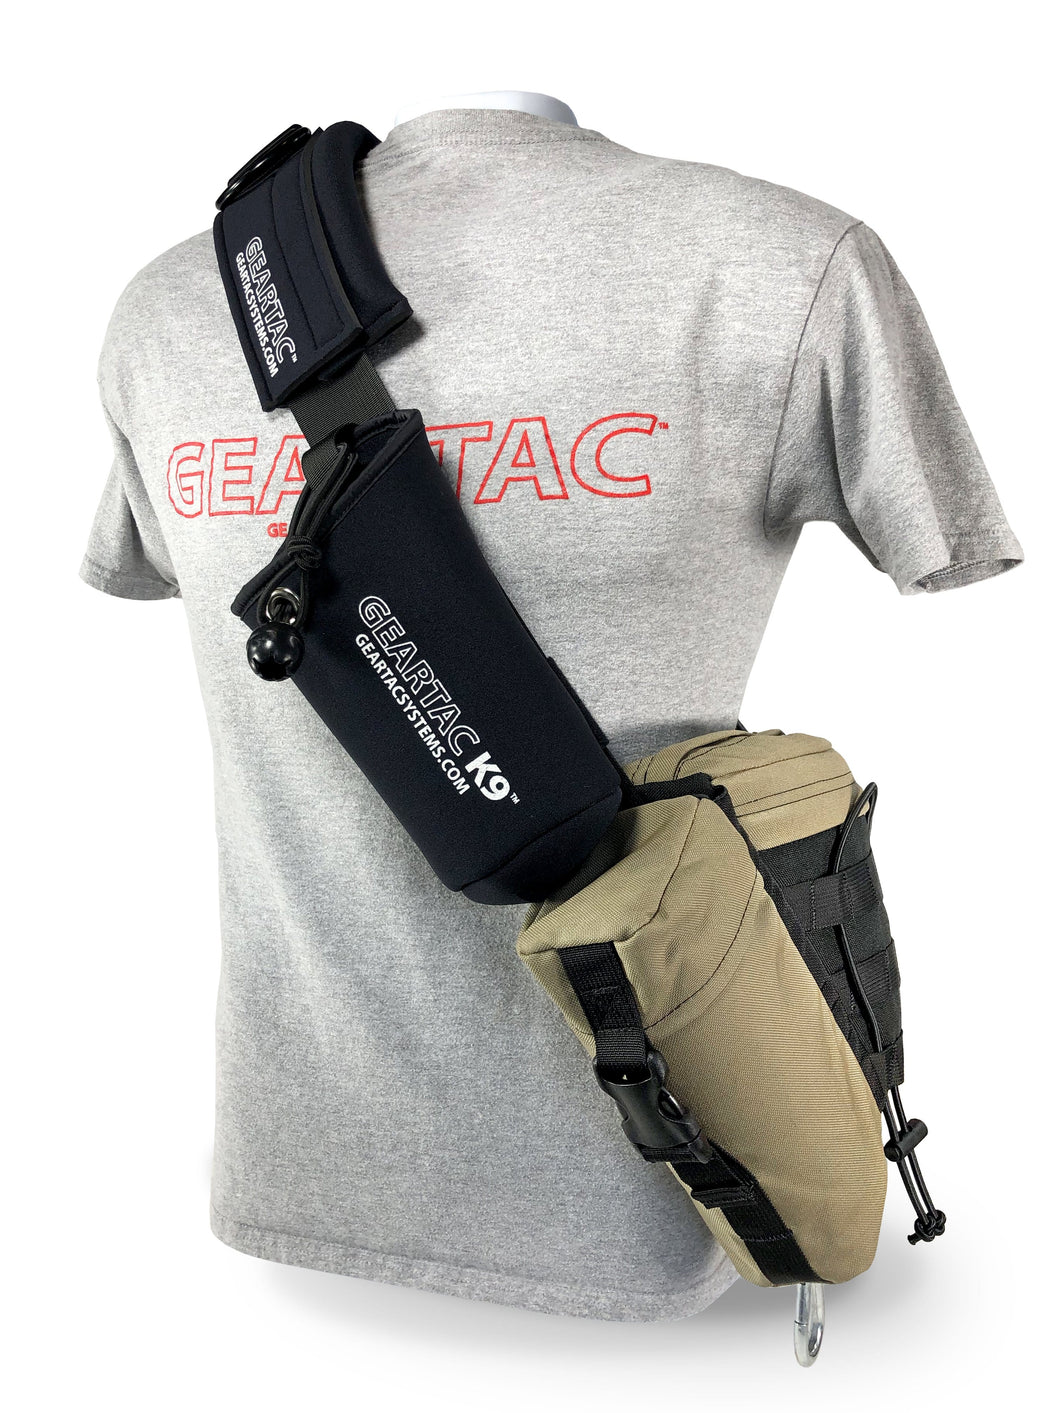 gearpac hands free dog walking sling bag with all the gear you need to walk your dog and cary all your walking and hiking needs